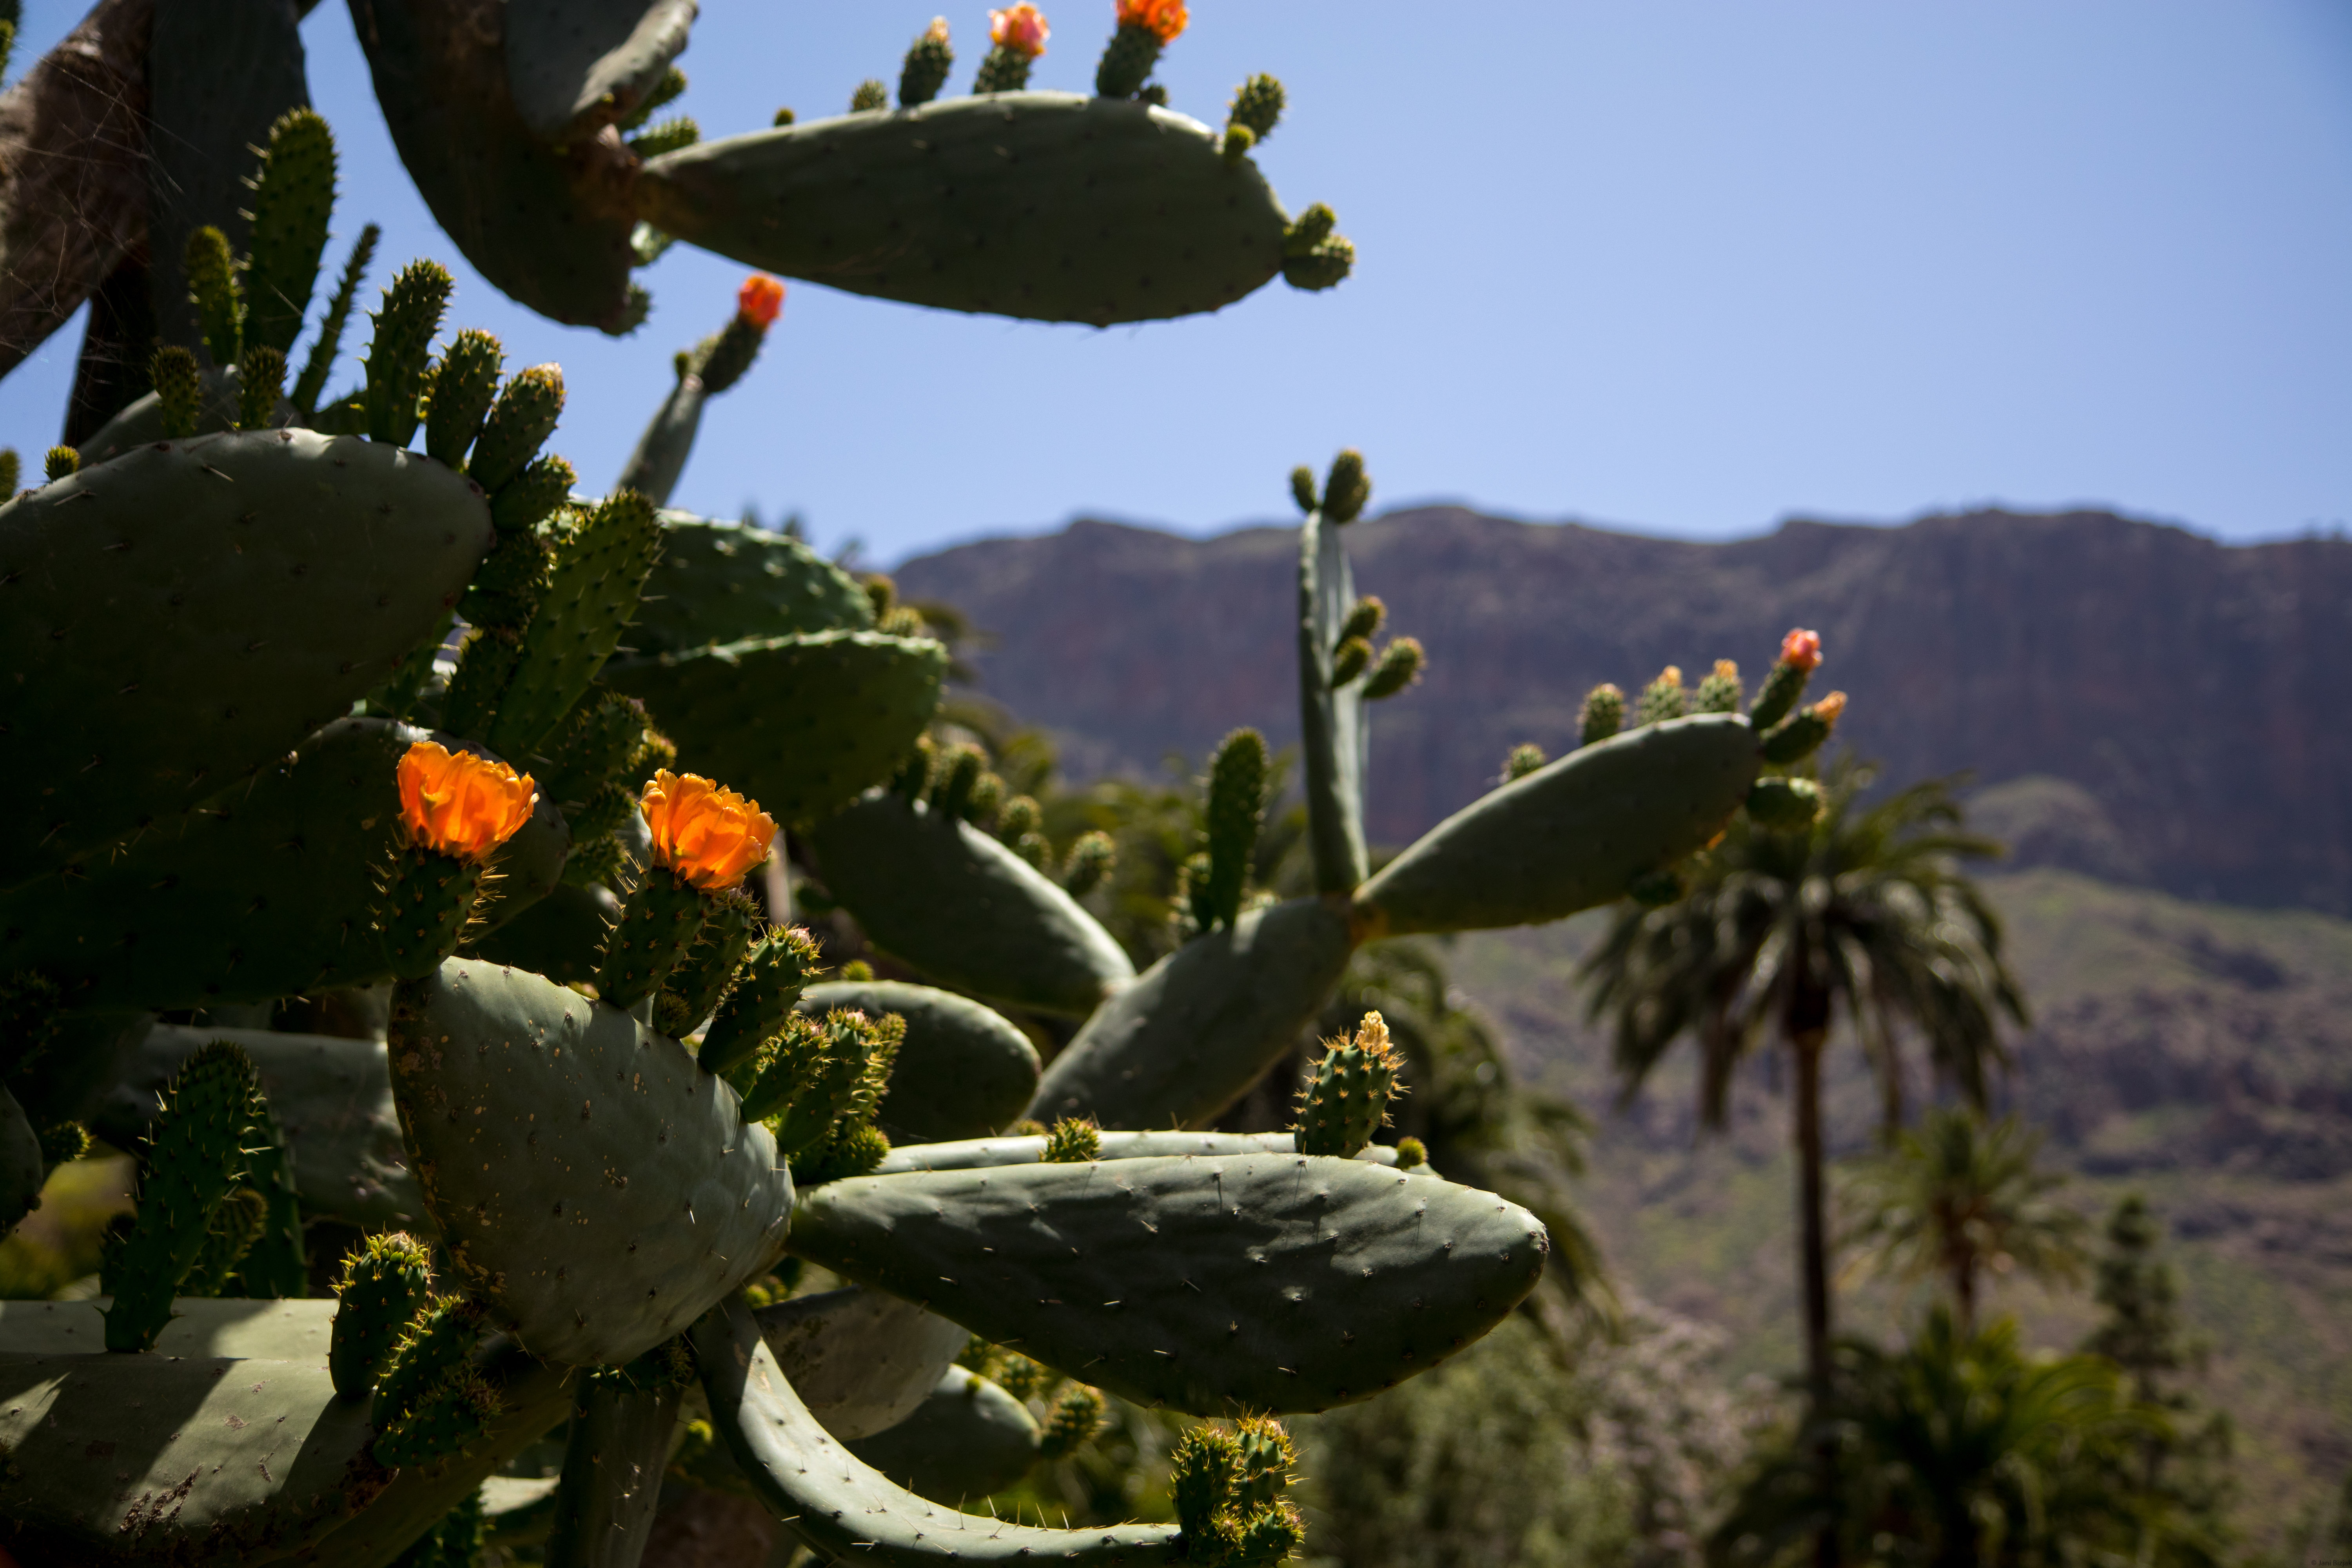 We actually ate a marmalade from this cactus. It was really good.